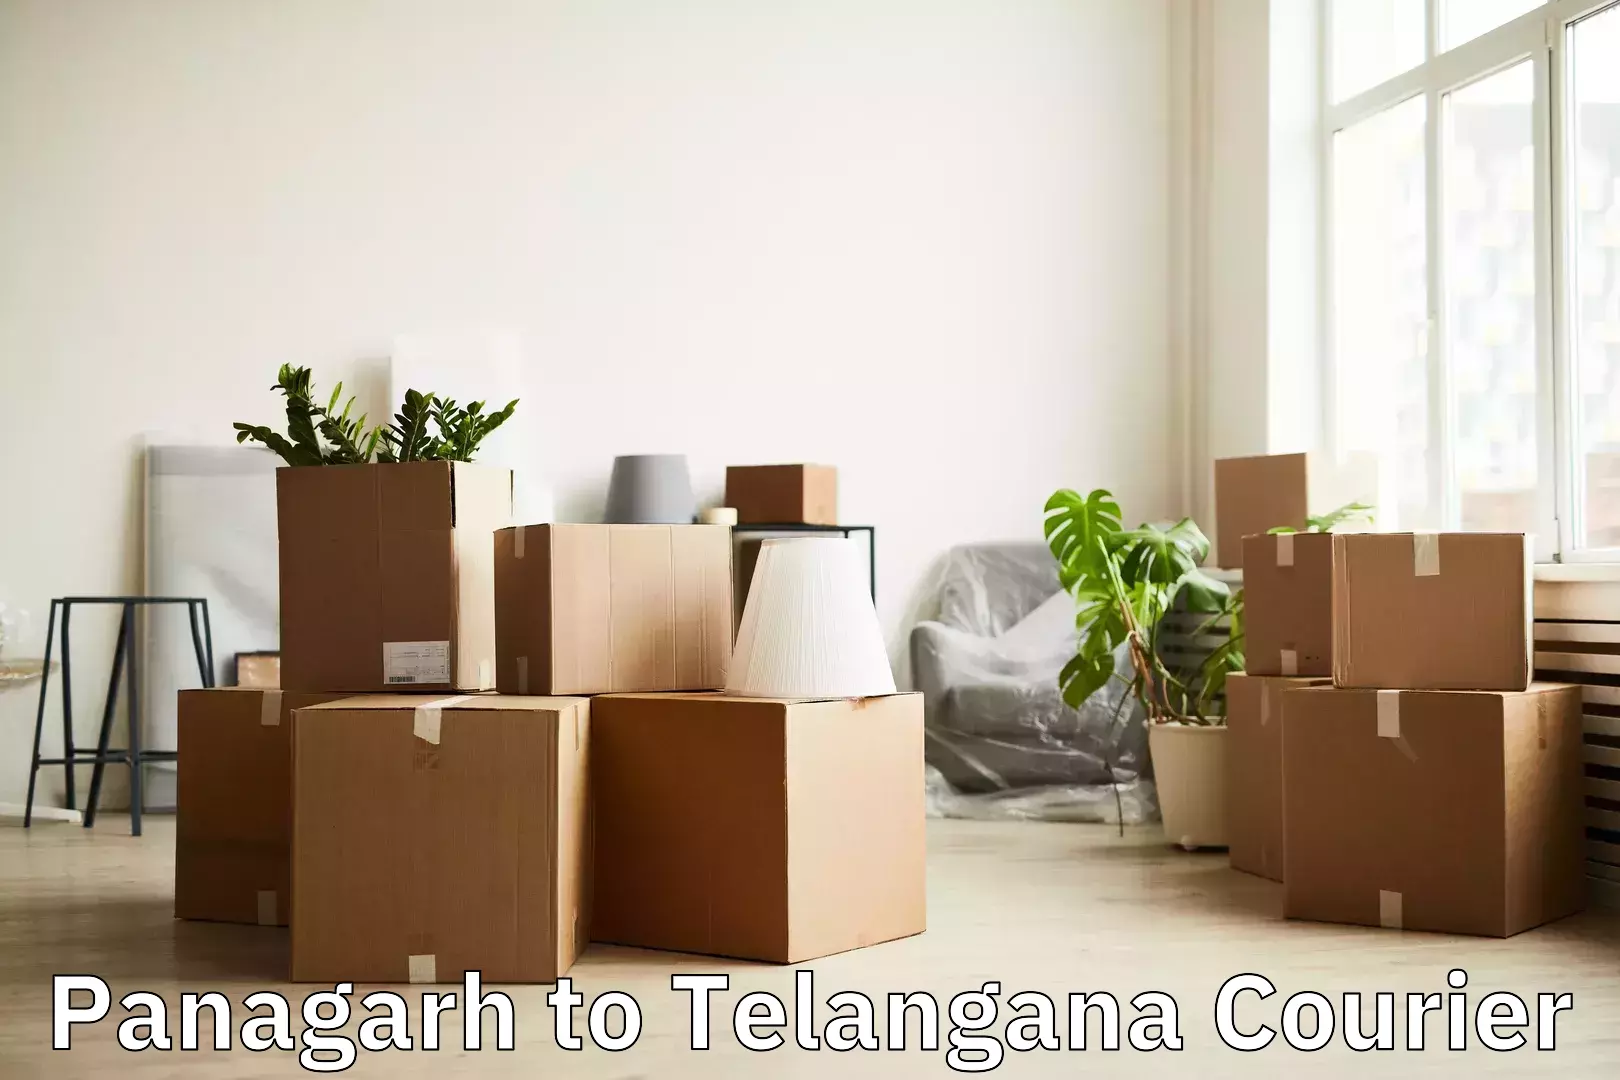 Luggage delivery app Panagarh to Sathupally